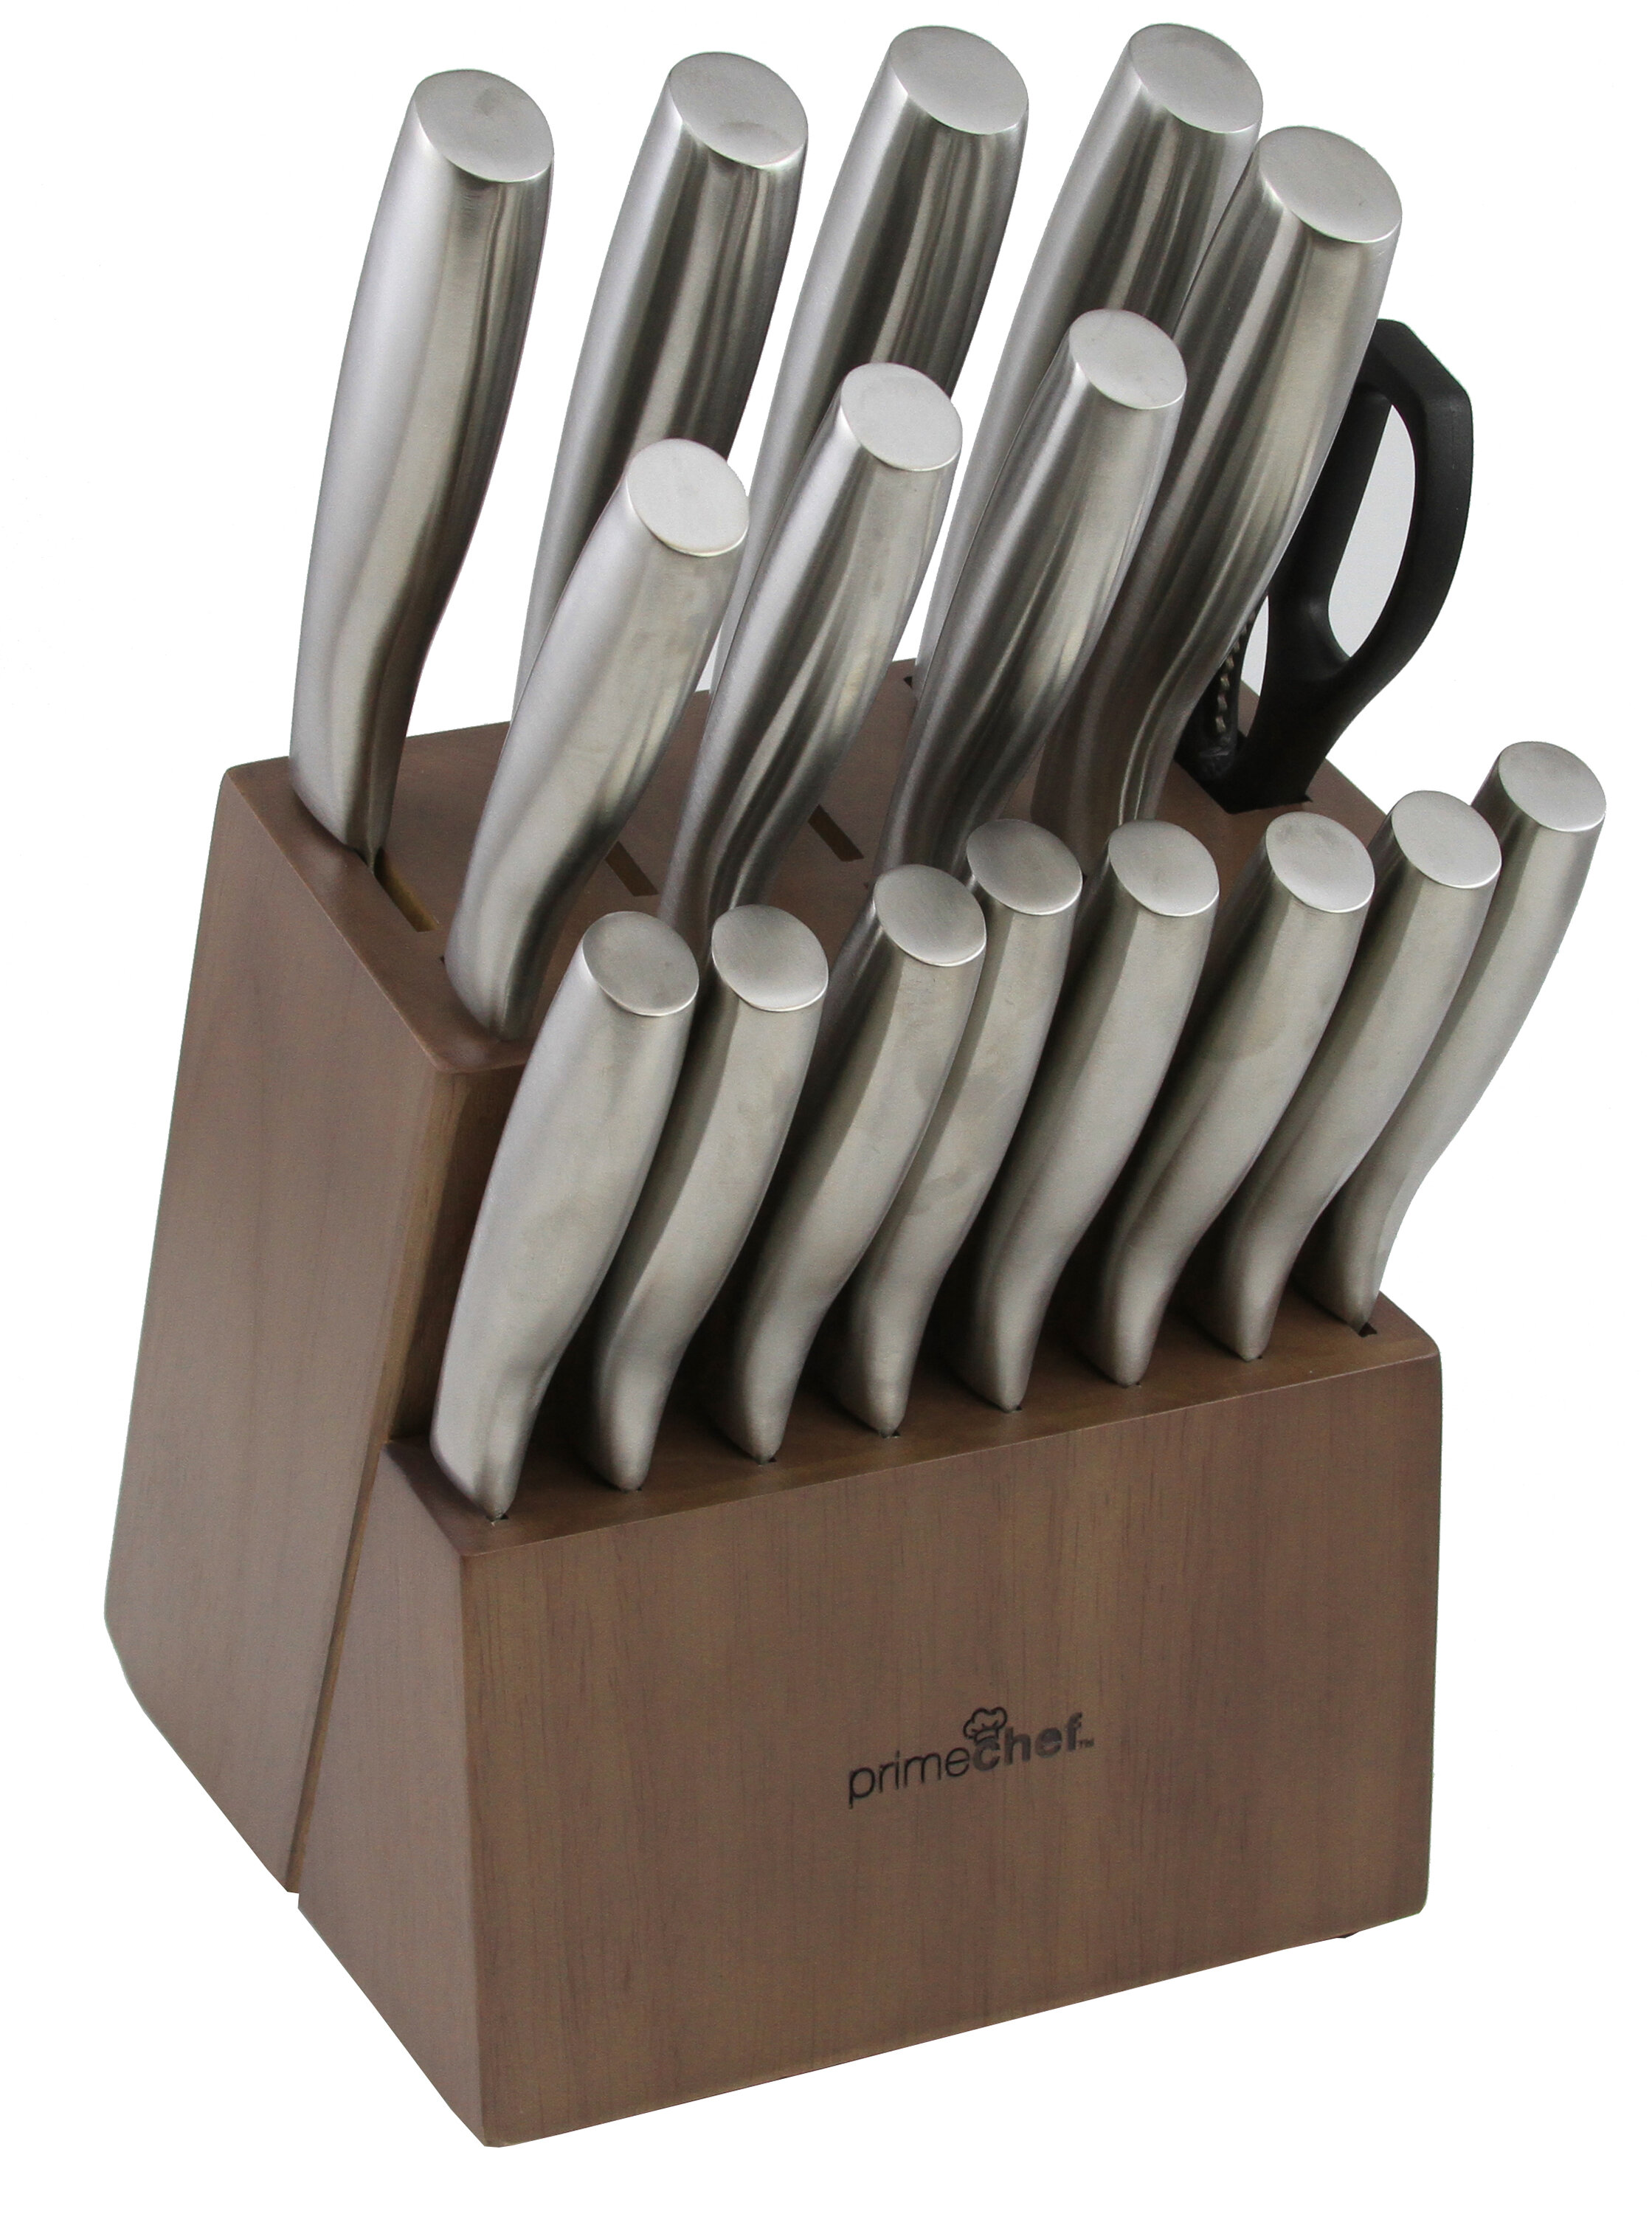 2 x 16 Piece Stainless steel cutlery set in gift box 